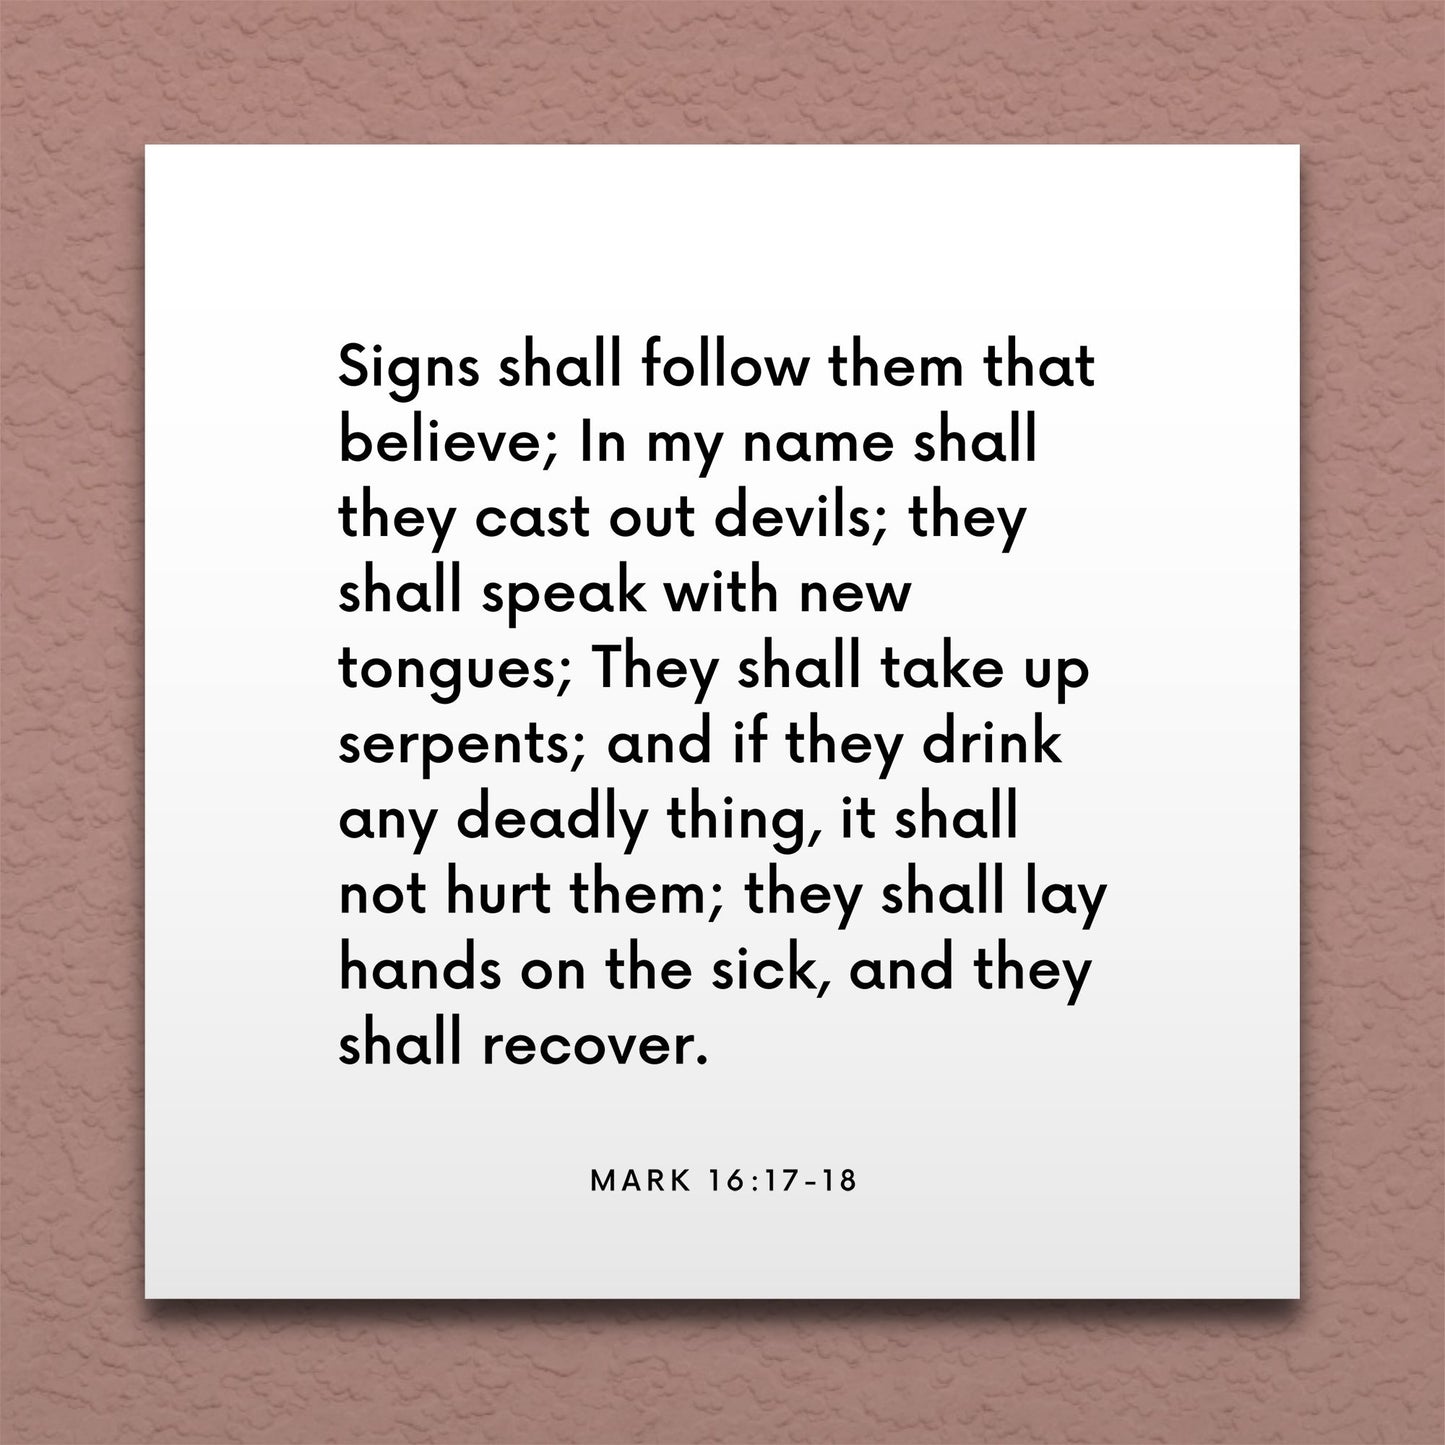 Wall-mounted scripture tile for Mark 16:17-18 - "Signs shall follow them that believe"